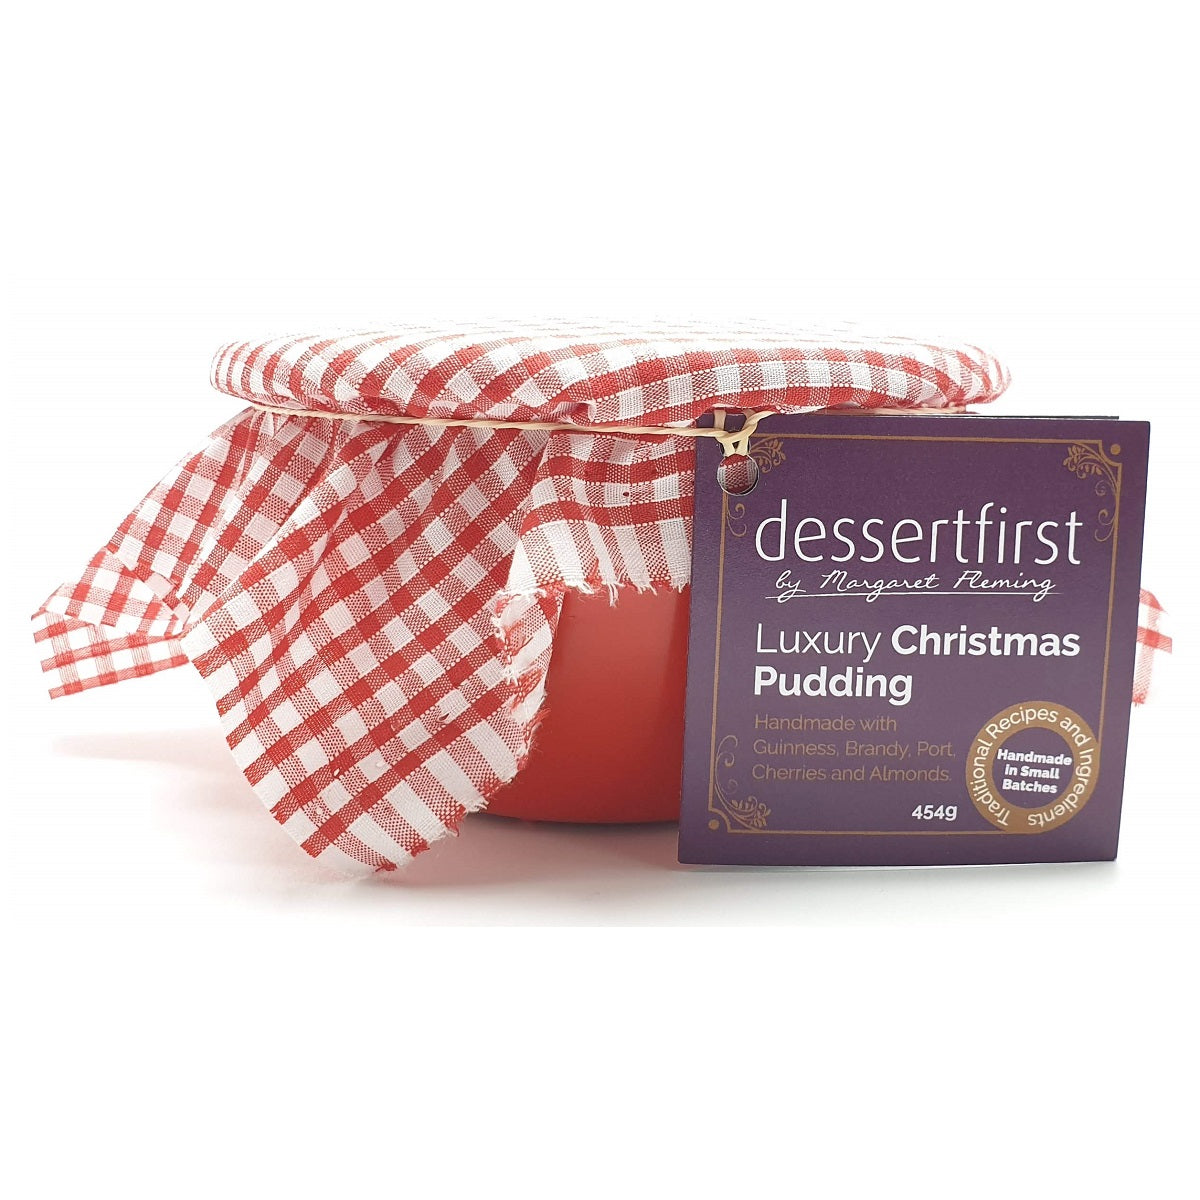 Dessert First by Margaret Fleming Luxury Christmas Pudding 454g